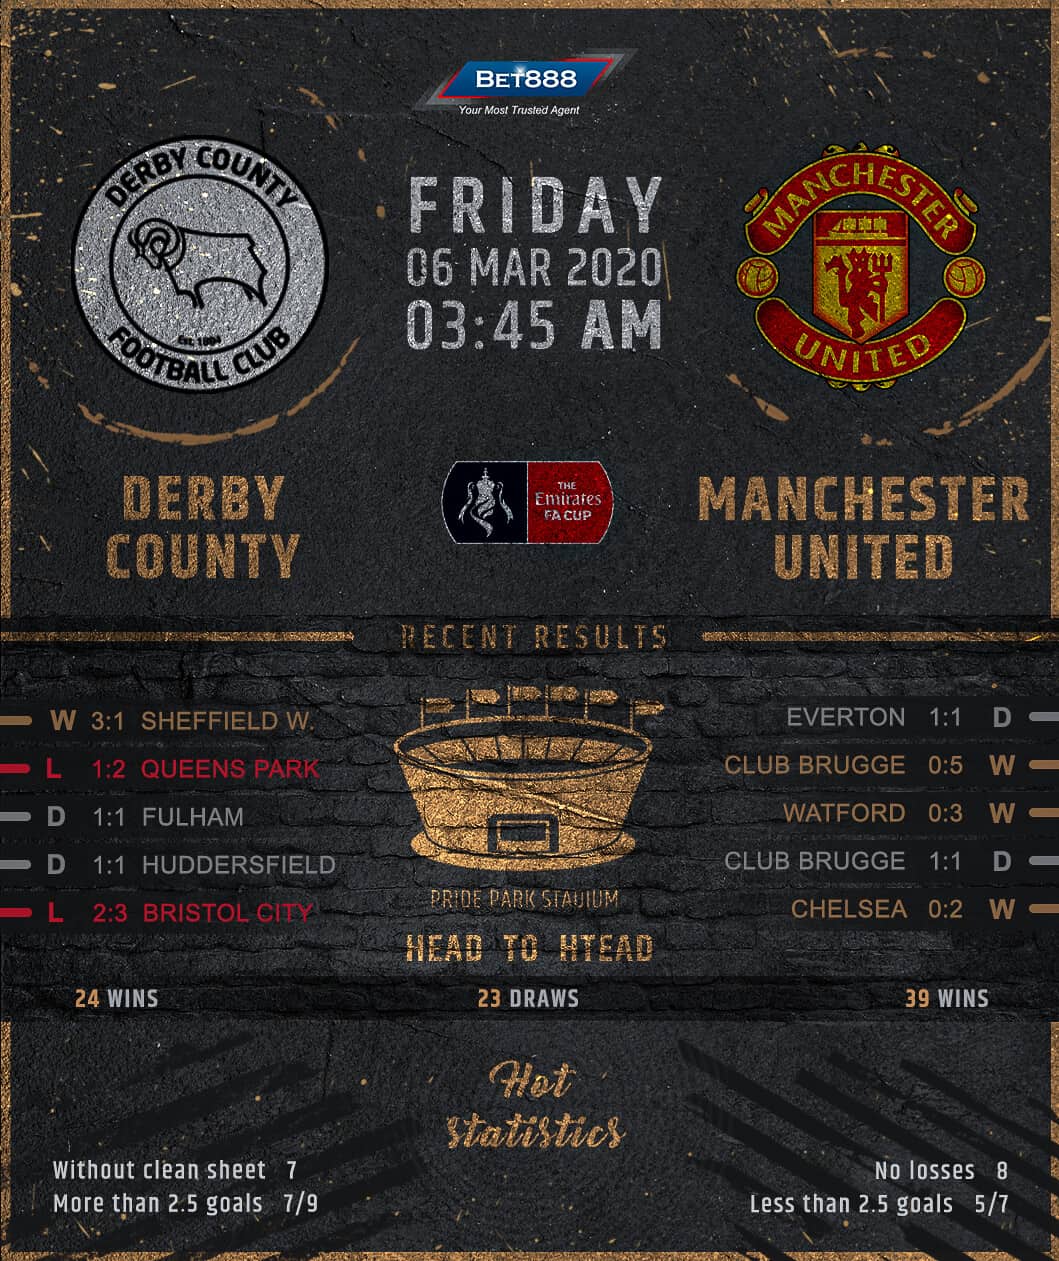 Derby County vs Manchester United﻿ 06/03/20